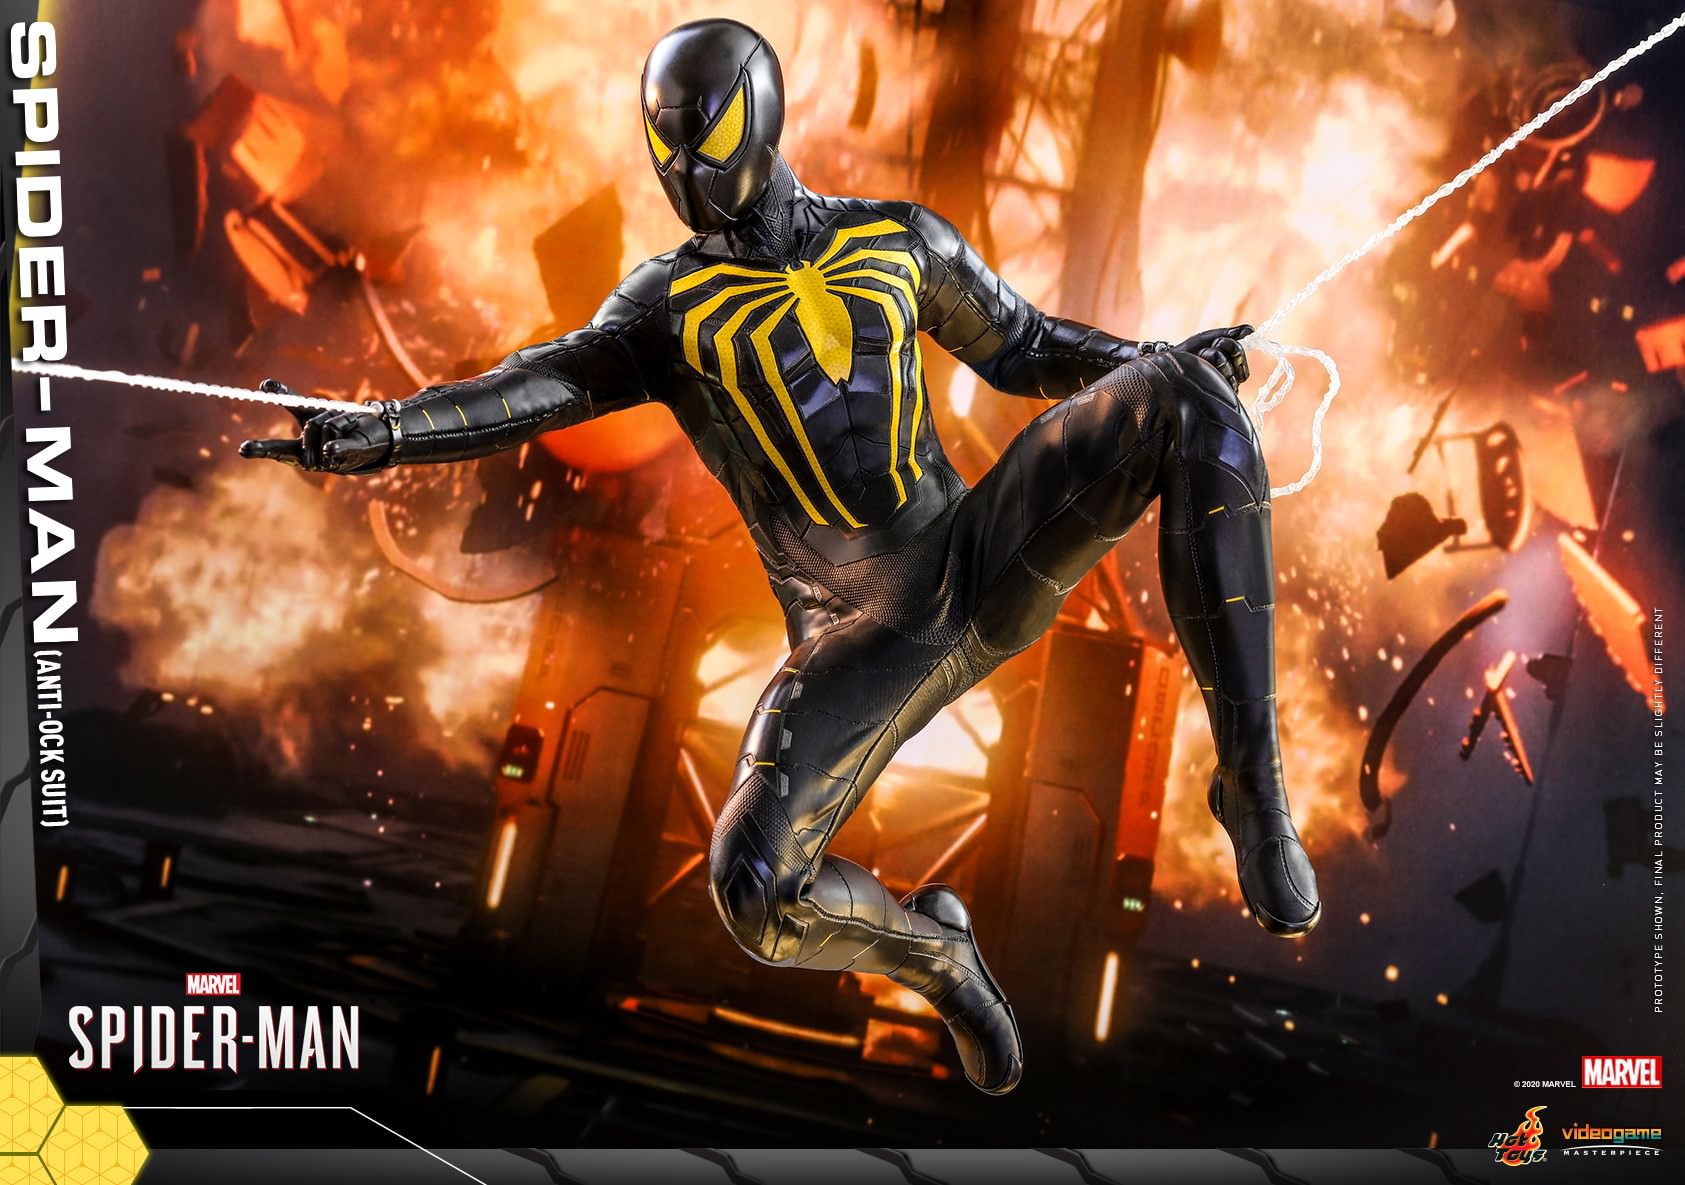 SPIDER-MAN (ANTI-OCK SUIT) By Hot Toys